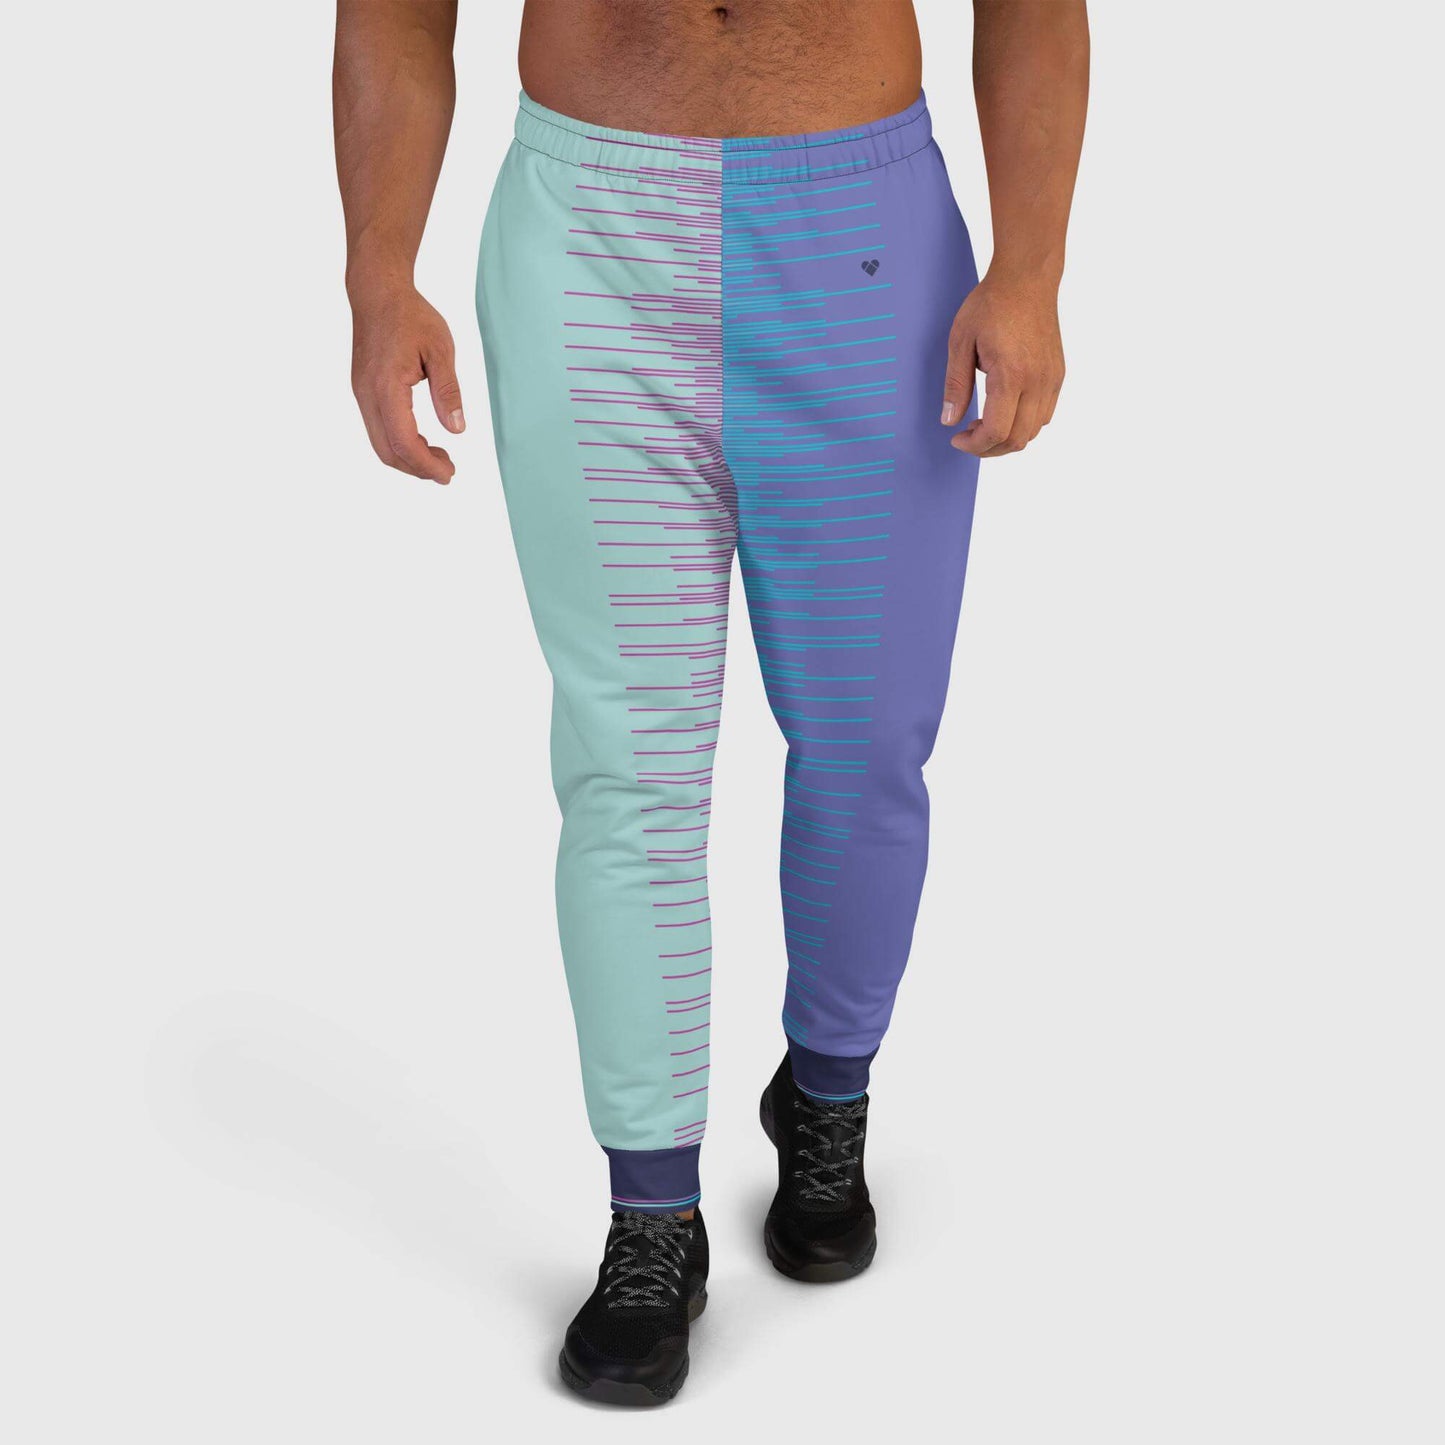 Versatile joggers for casual or active wea